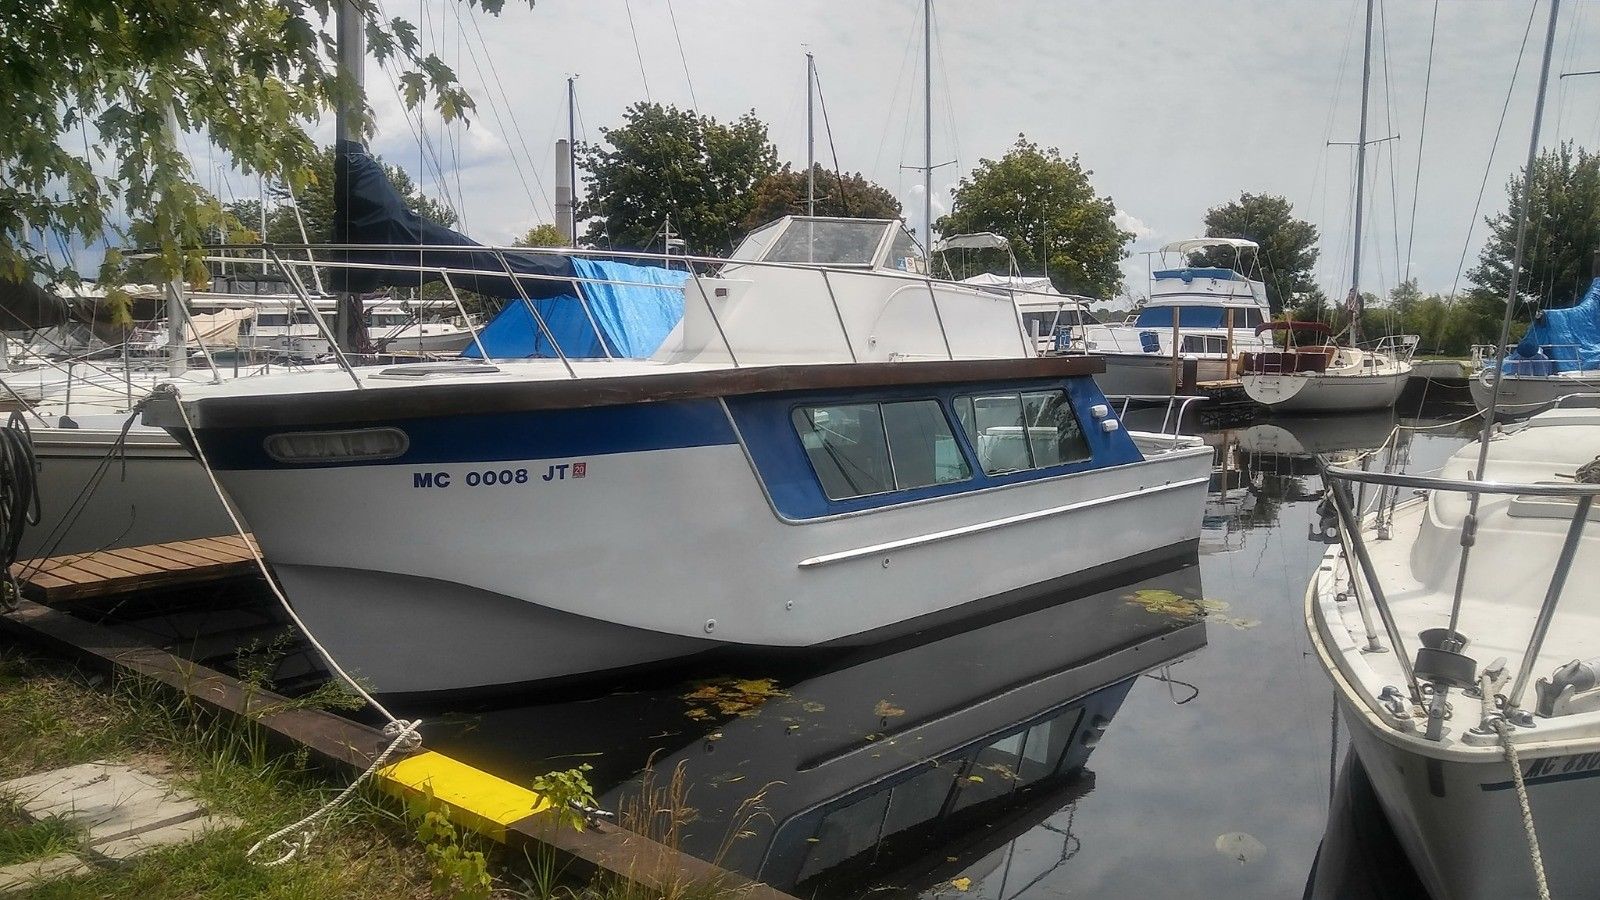 up for sale is a 28 ft cargill cutter cabin cruiser. the 30 ft version of t...